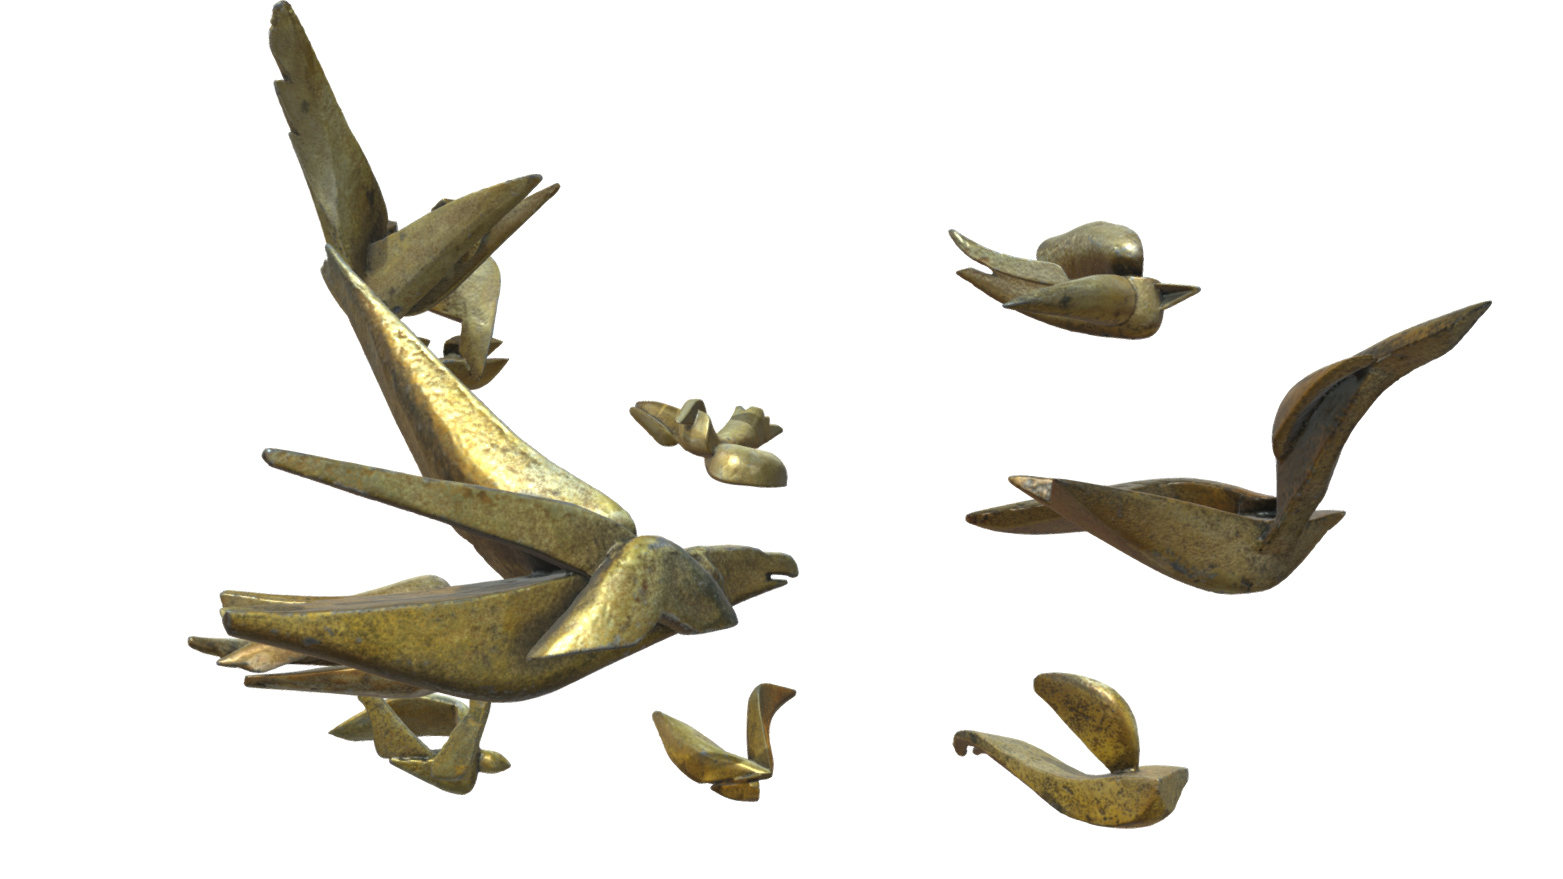 Virtual 3D model of gold bird-like forms